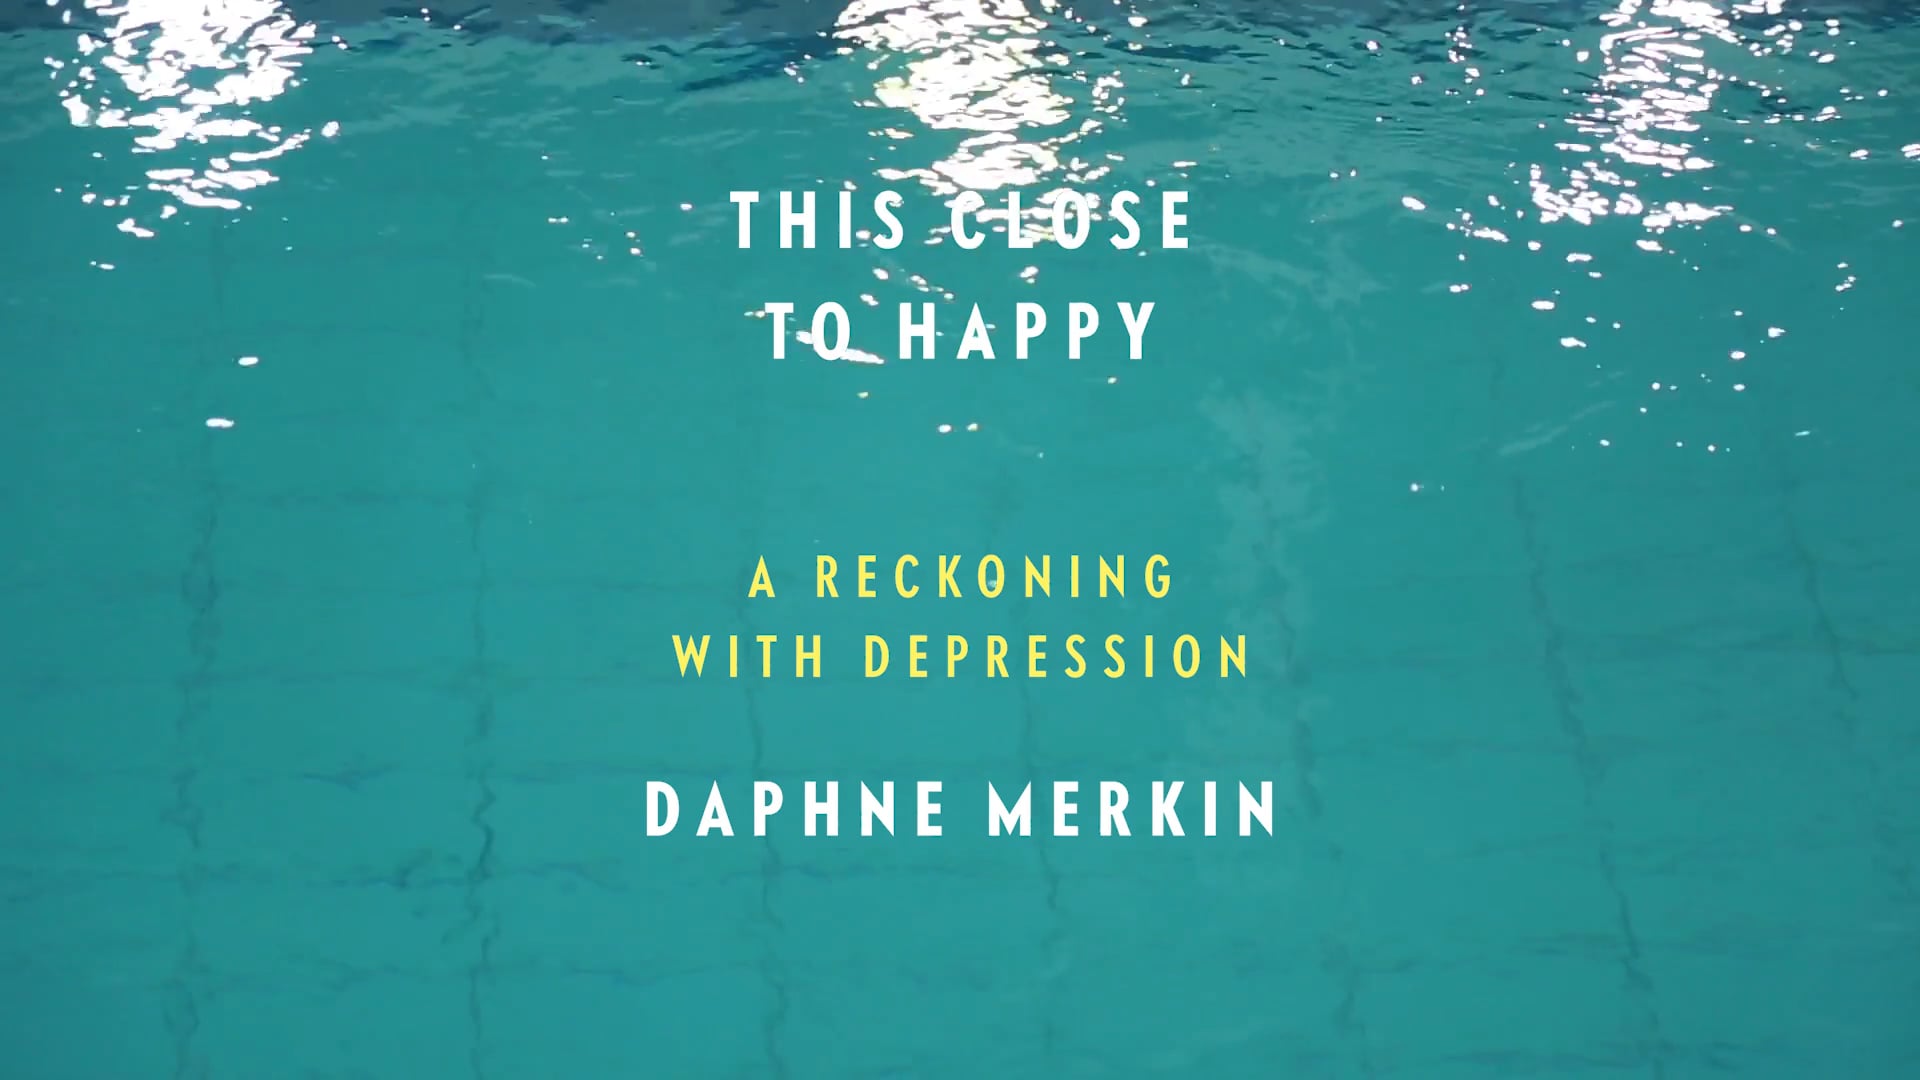 THIS CLOSE TO HAPPY: A RECKONING WITH DEPRESSION by Daphne Merkin | Book Trailer